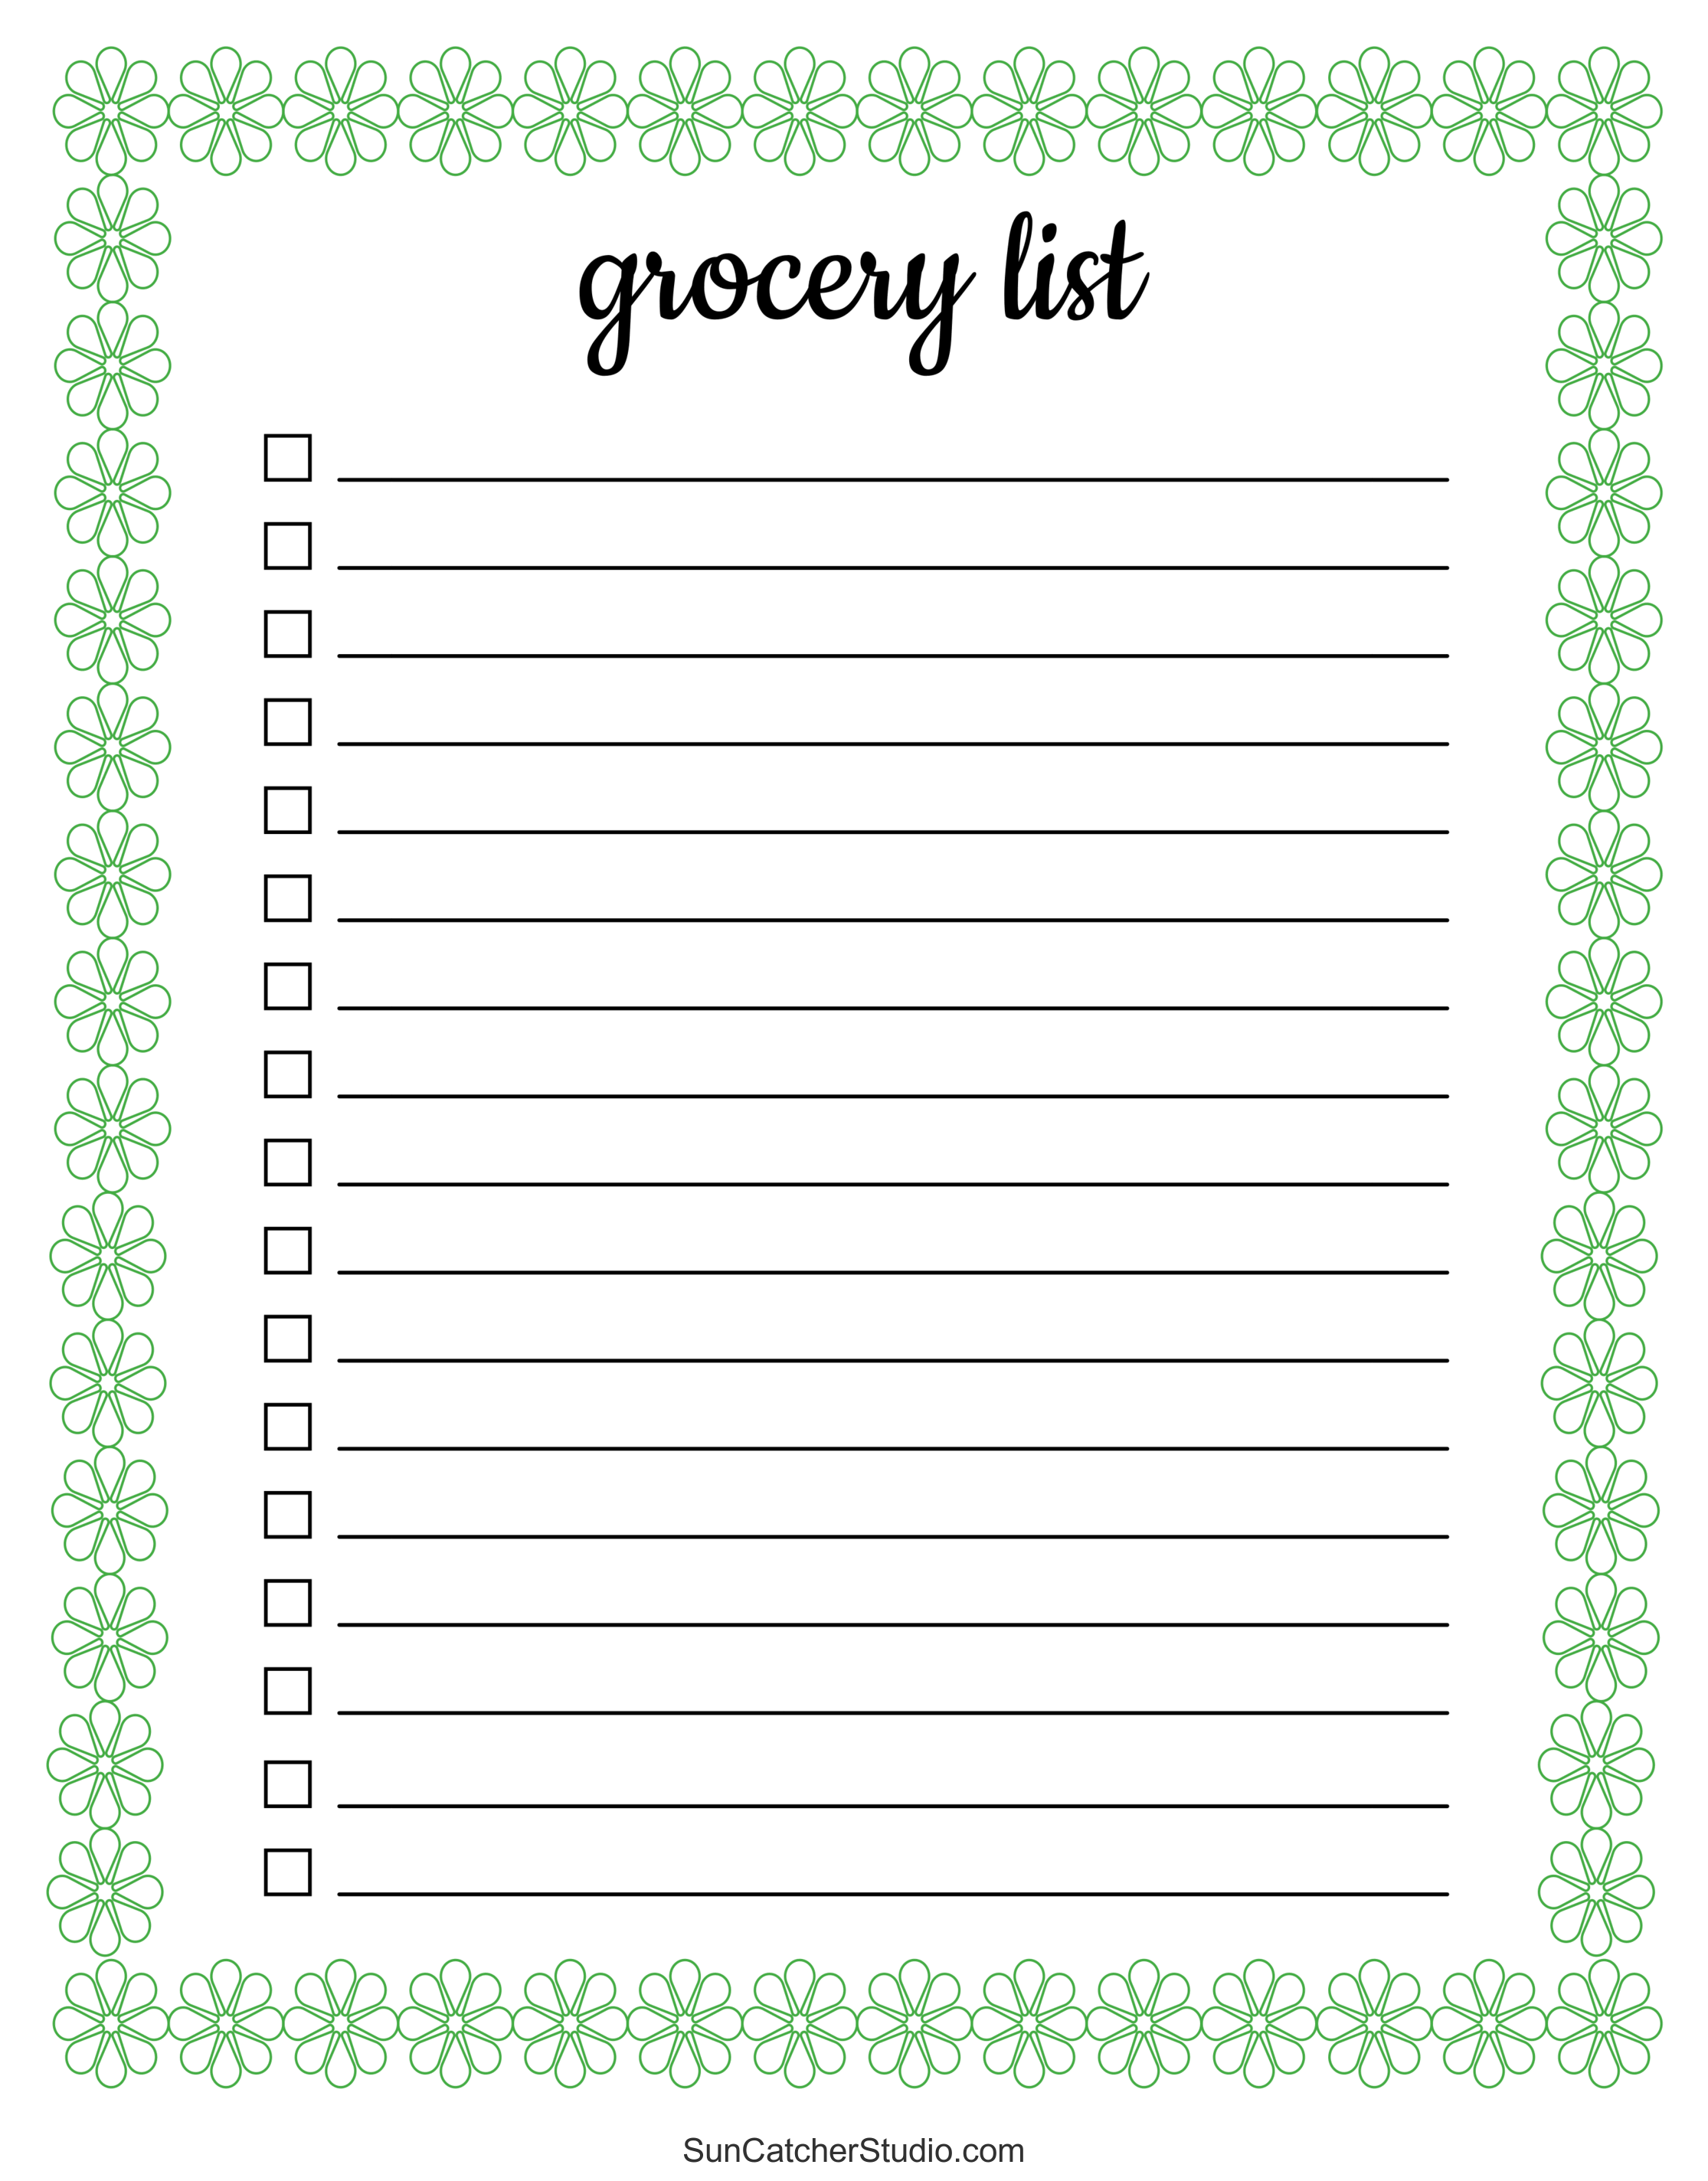 Free Printable Grocery List Templates (PDF): Shopping Lists – DIY Projects,  Patterns, Monograms, Designs, Templates